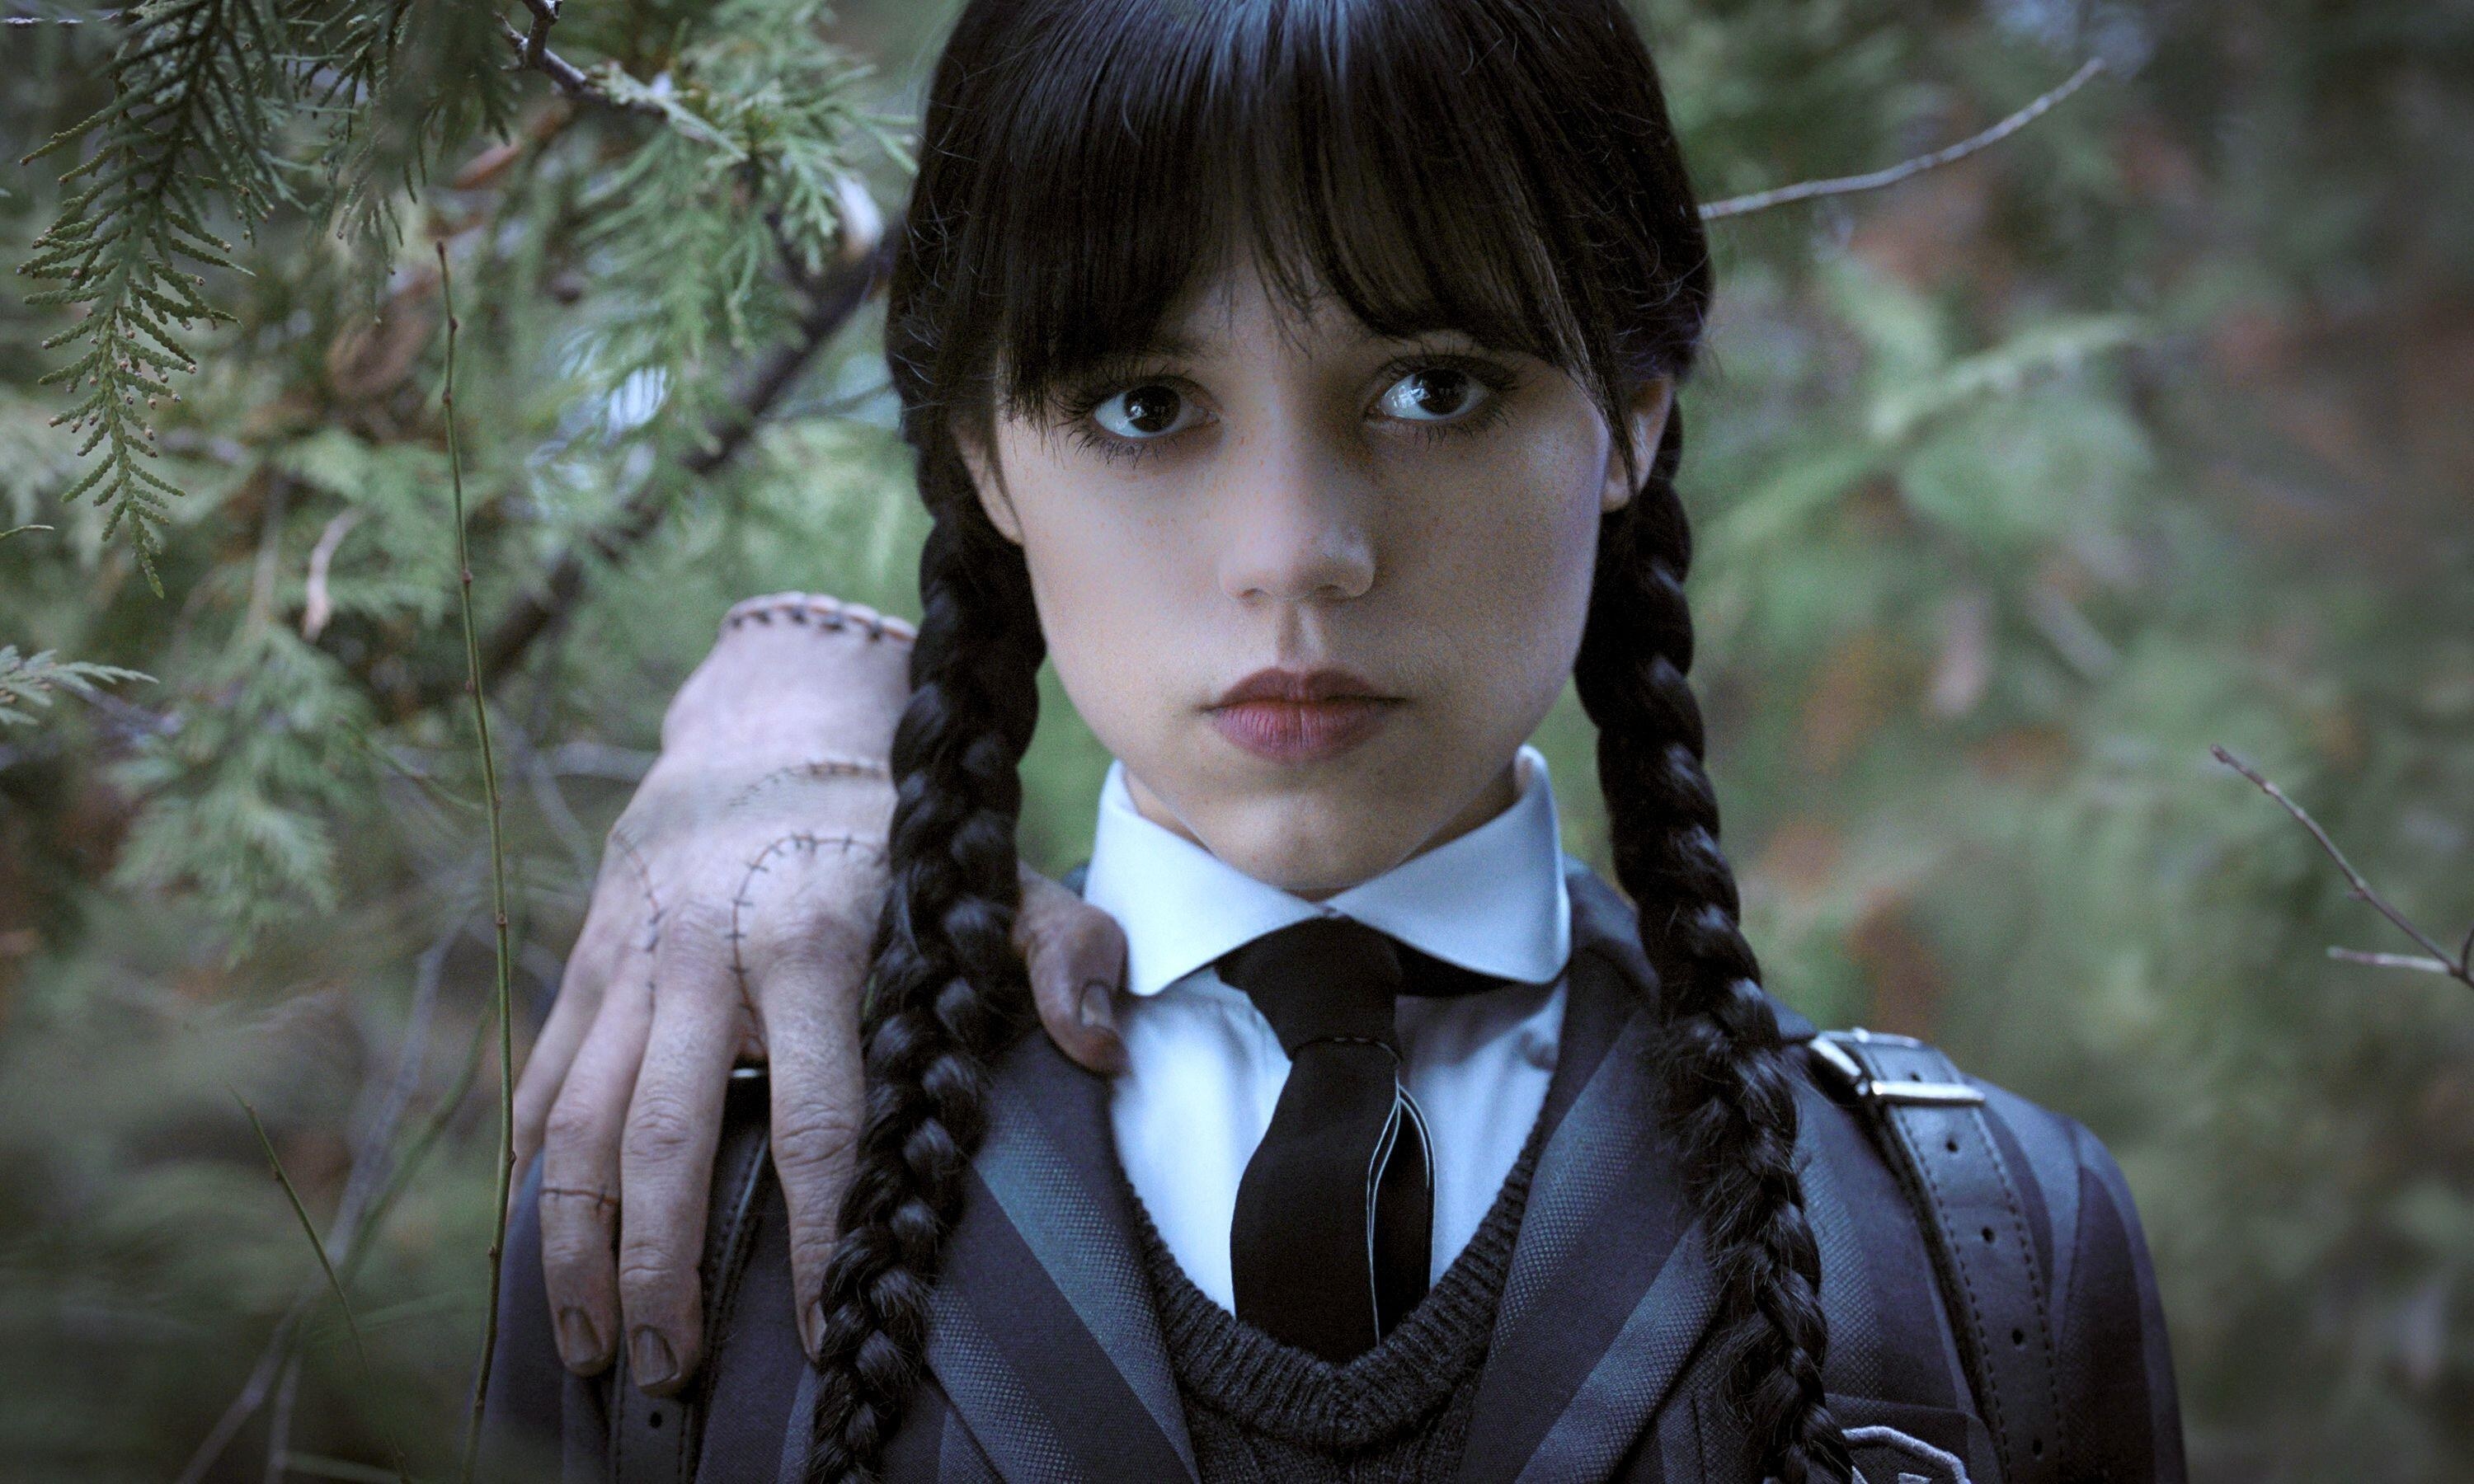 A severed hand rests on the shoulders of Jenna Ortega as Wednesday Addams